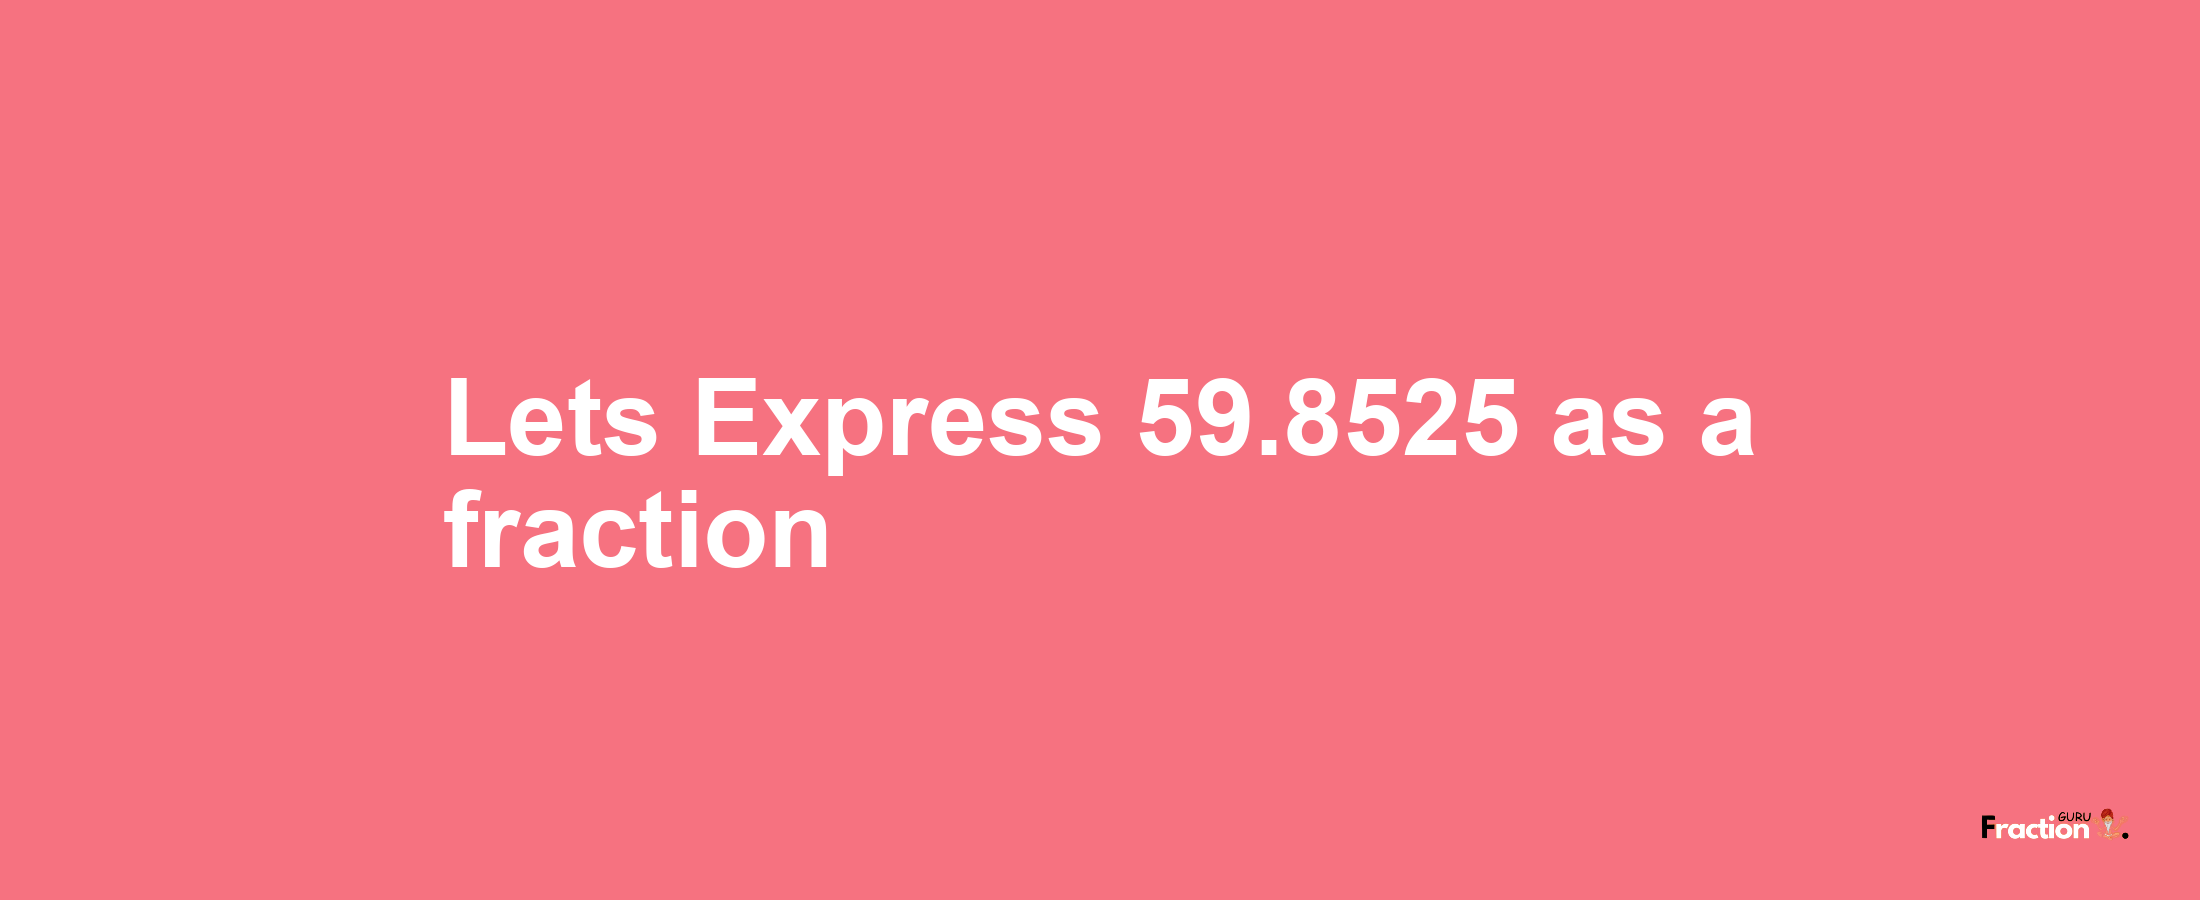 Lets Express 59.8525 as afraction